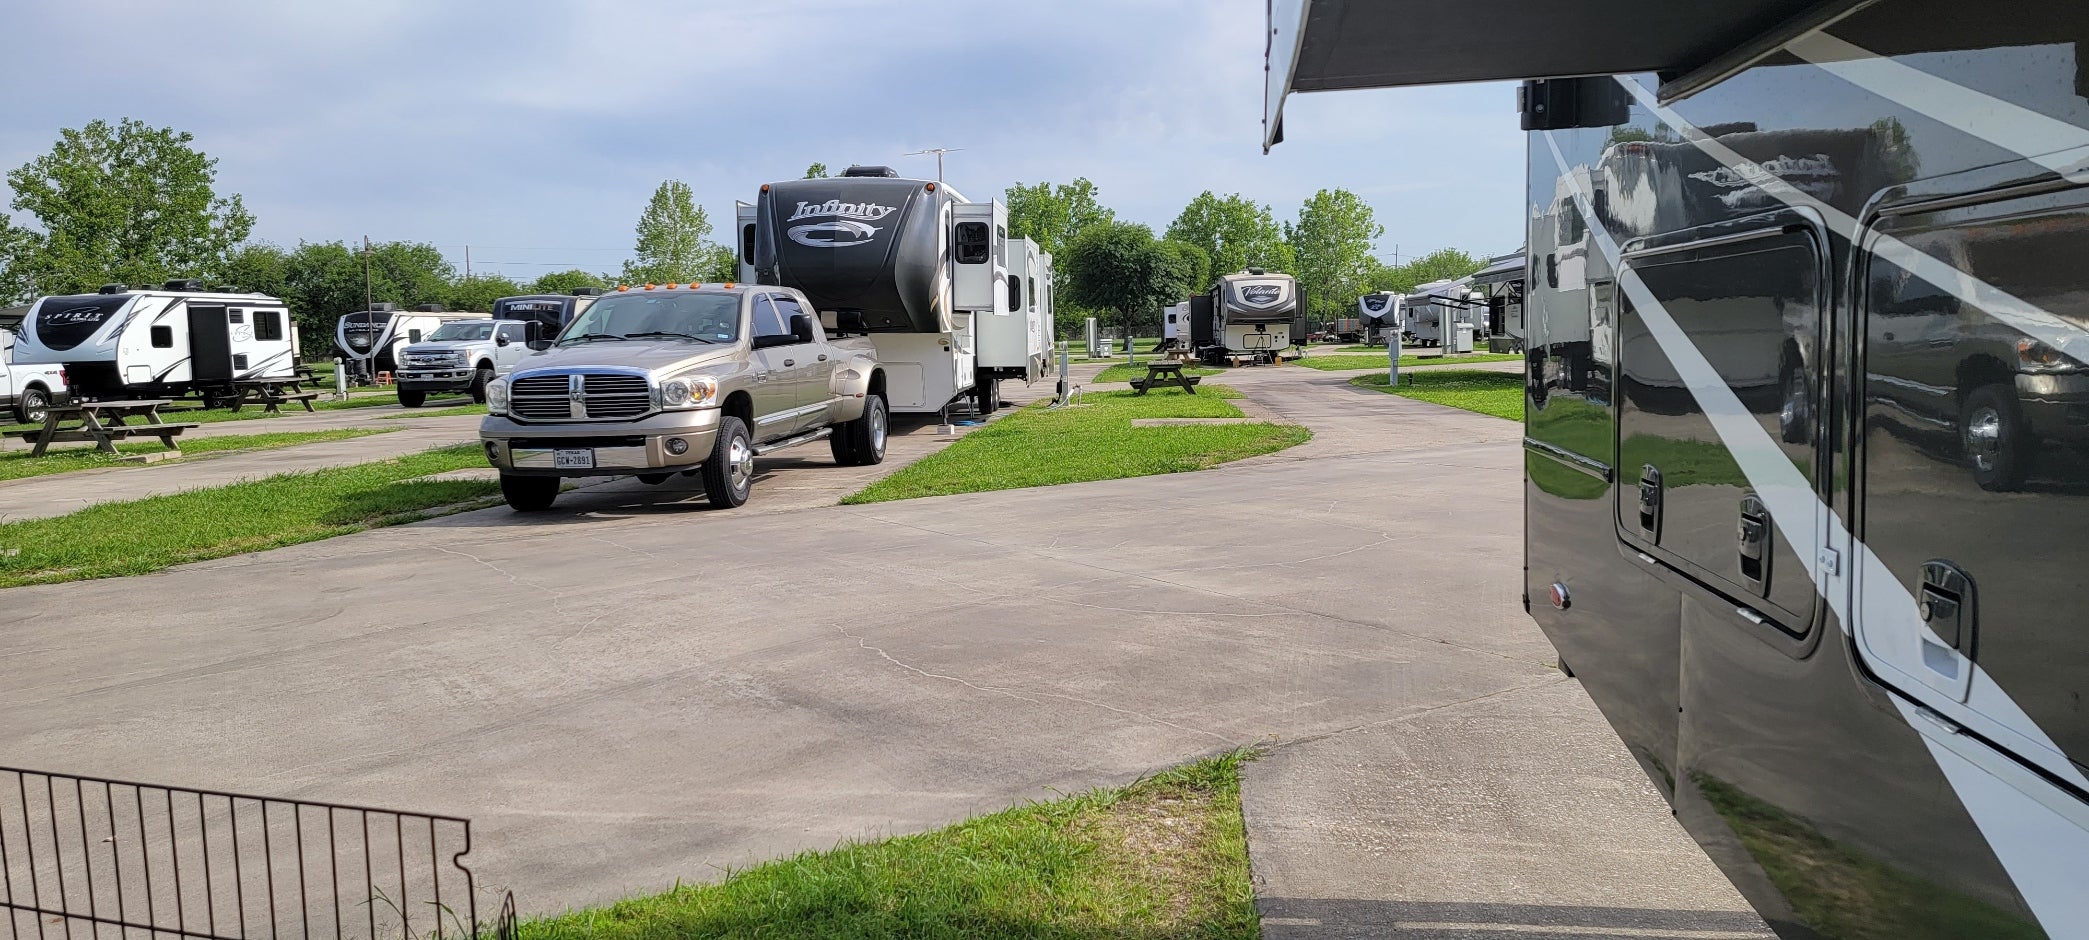 Camper submitted image from Gulf Coast RV Resort - 1